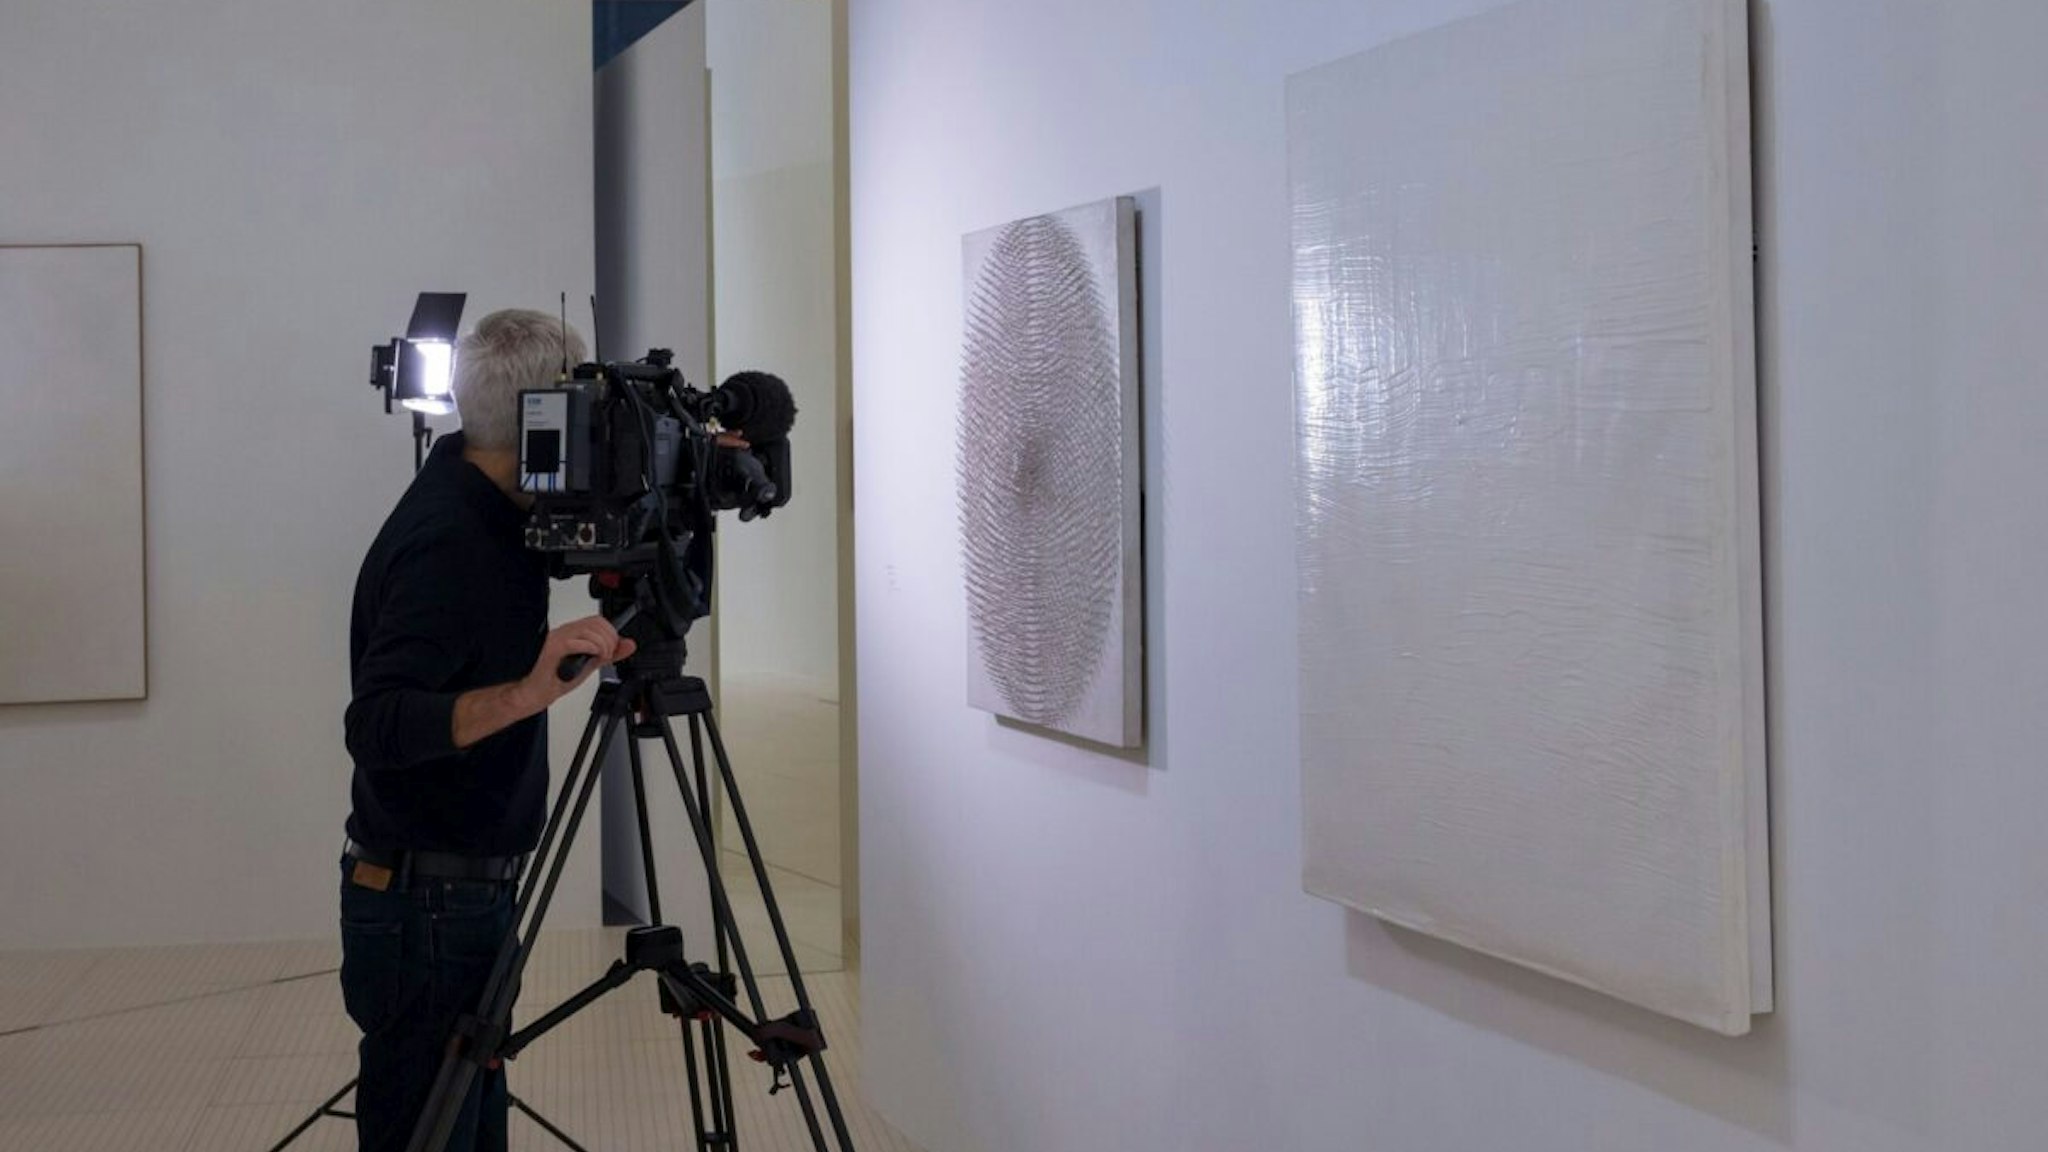 A reporter films "Pure Energy III" (1959) by German artist Otto Piene displayed in the exhibition "Le ciel comme atelier, Yves Klein et ses contemporains" on July 16, 2020 at the Pompidou-Metz museum in Metz, eastern France